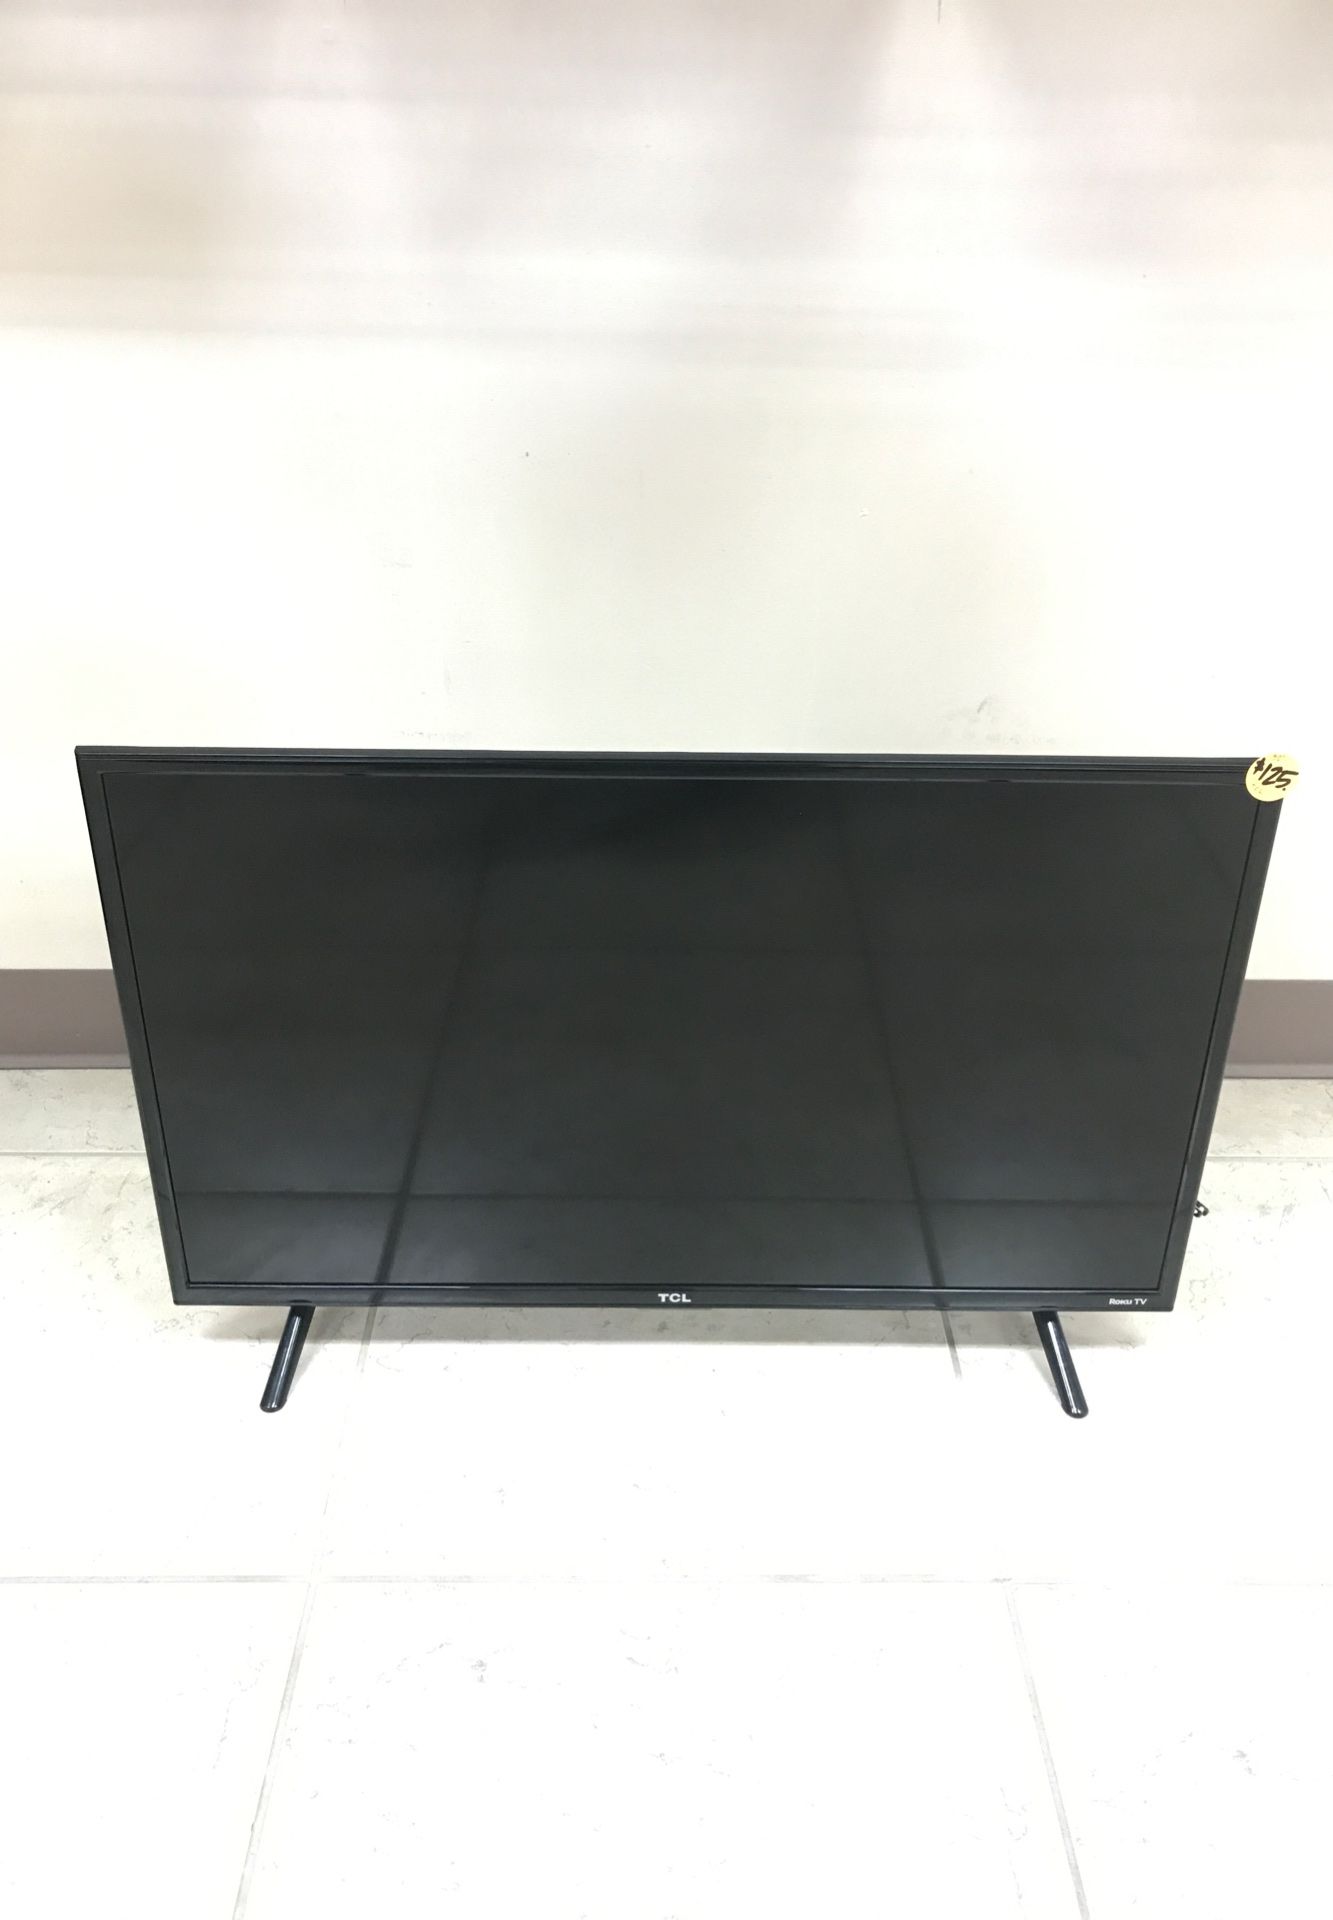 EXCELLENT CONDITION !!! 32” TCL ROKU TV MODEL 32S301.